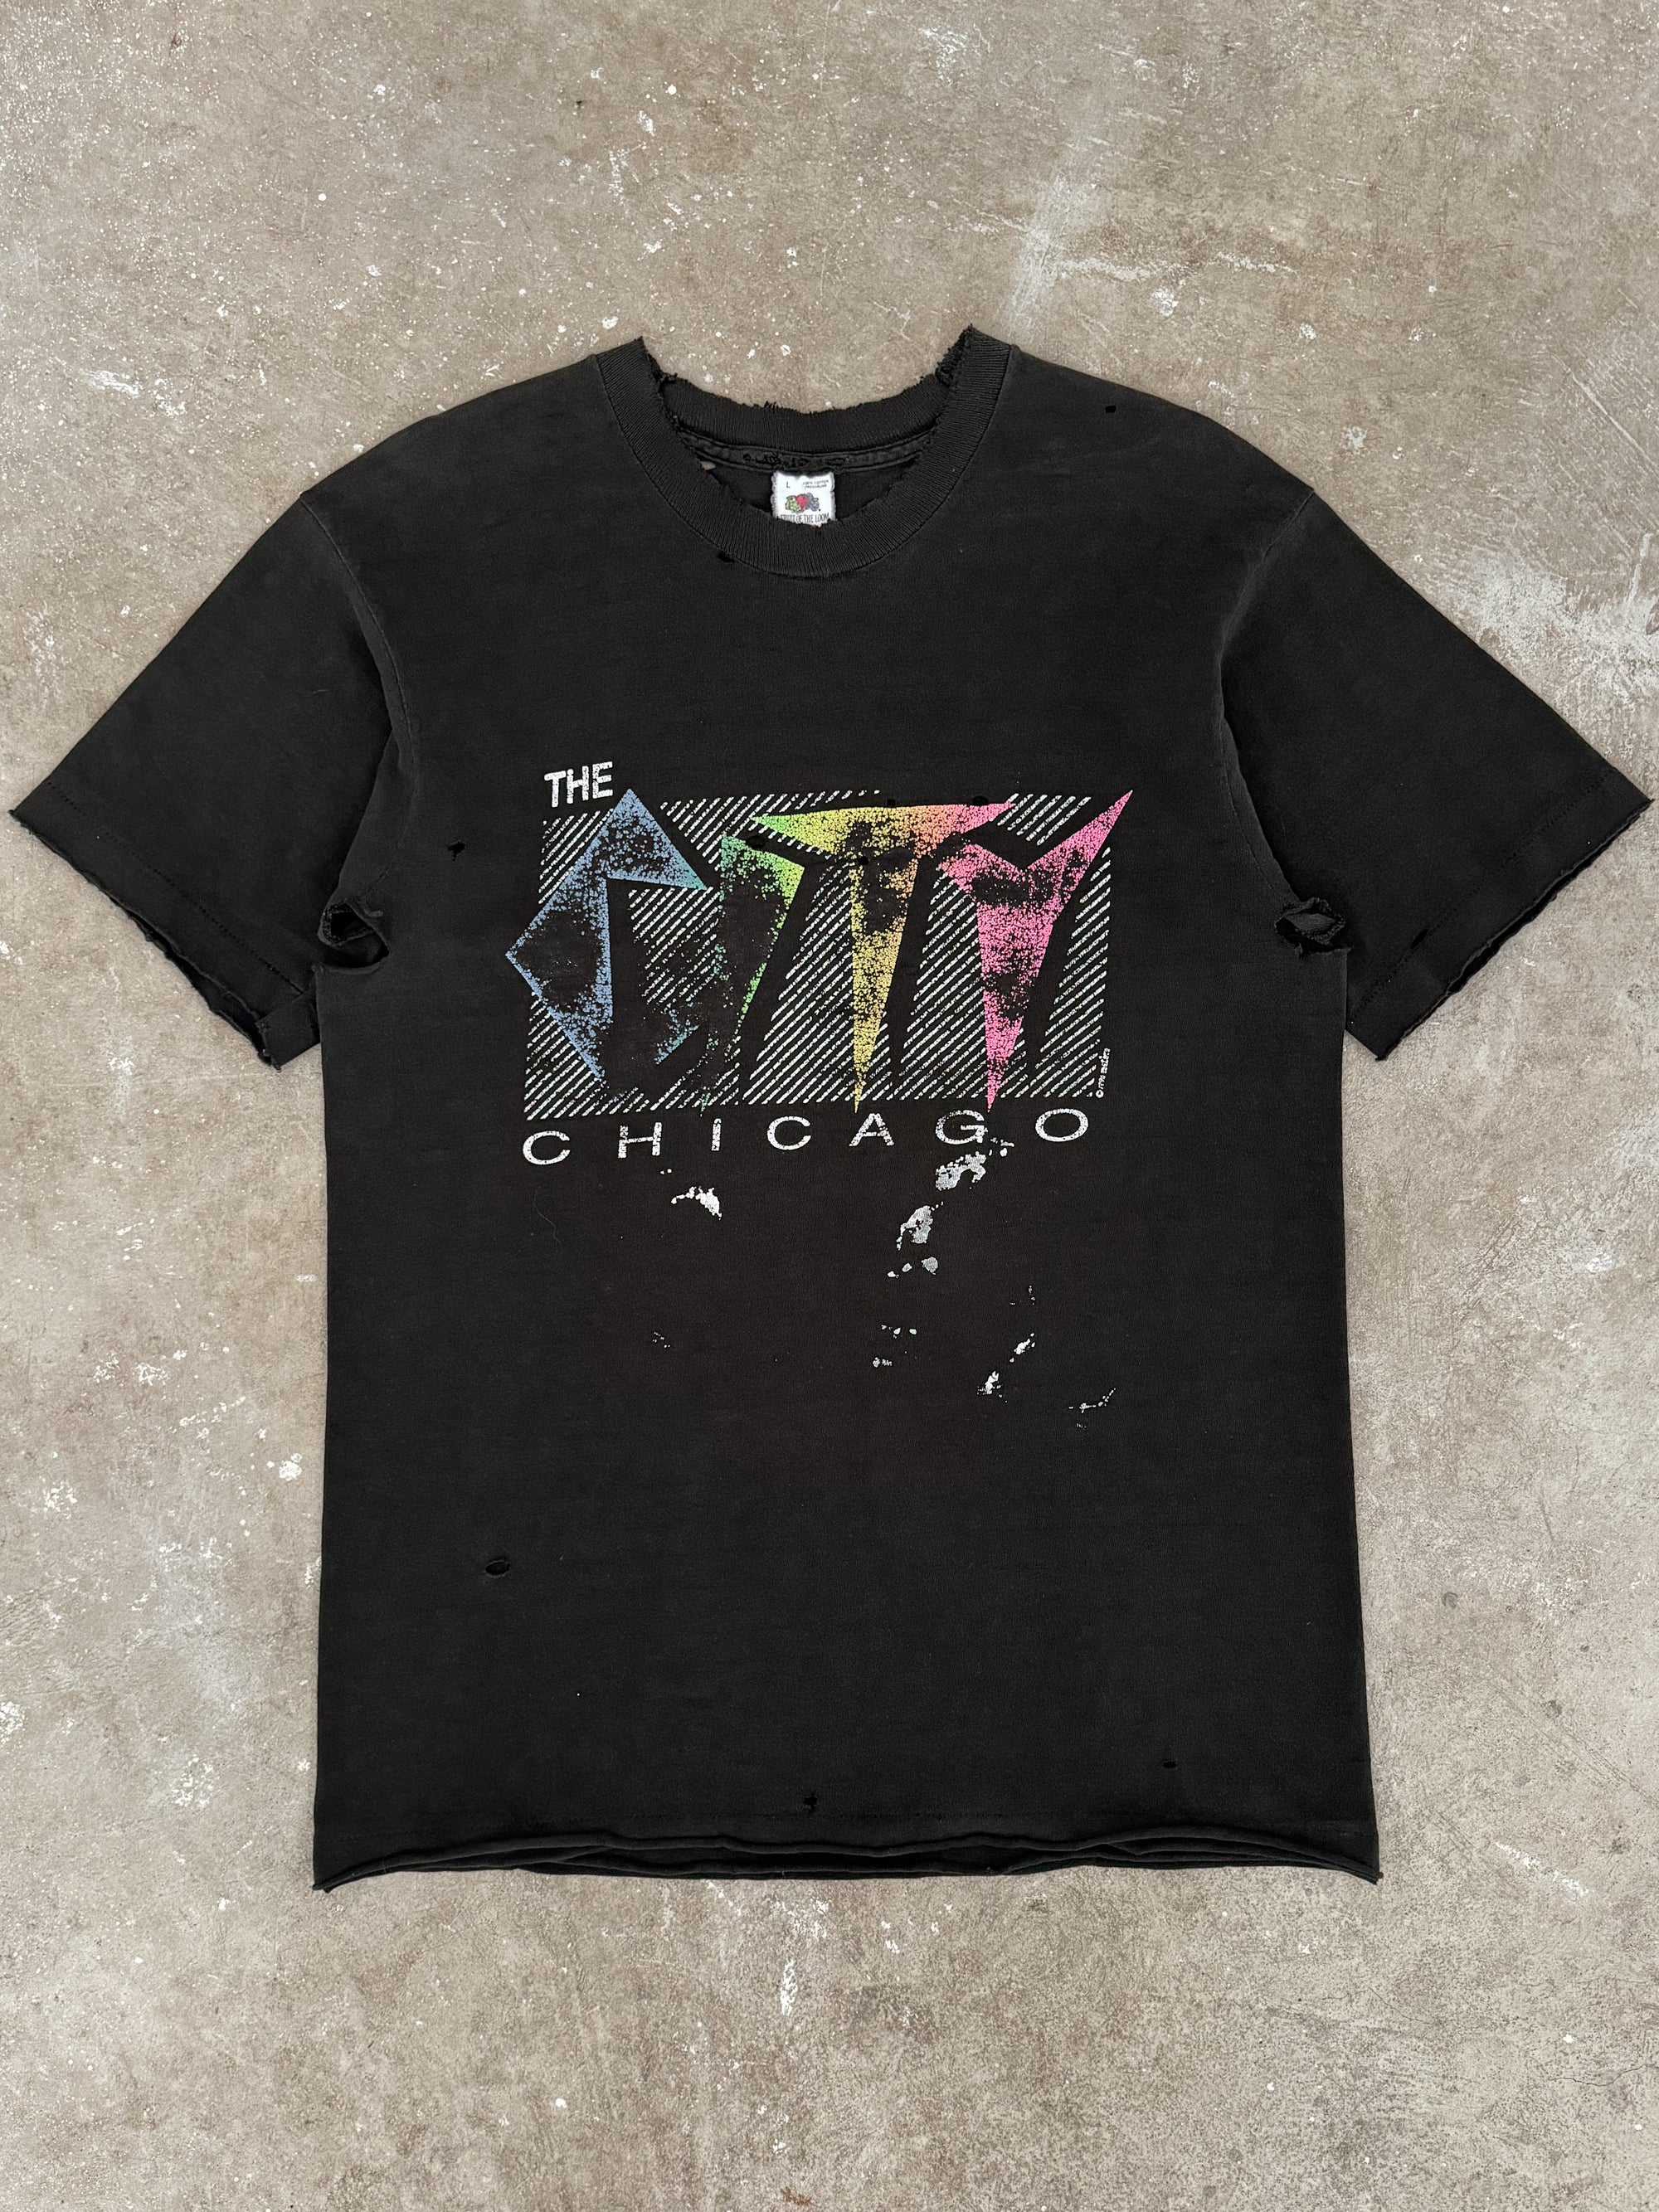 1990s "Chicago The City" Distressed Tee (M)